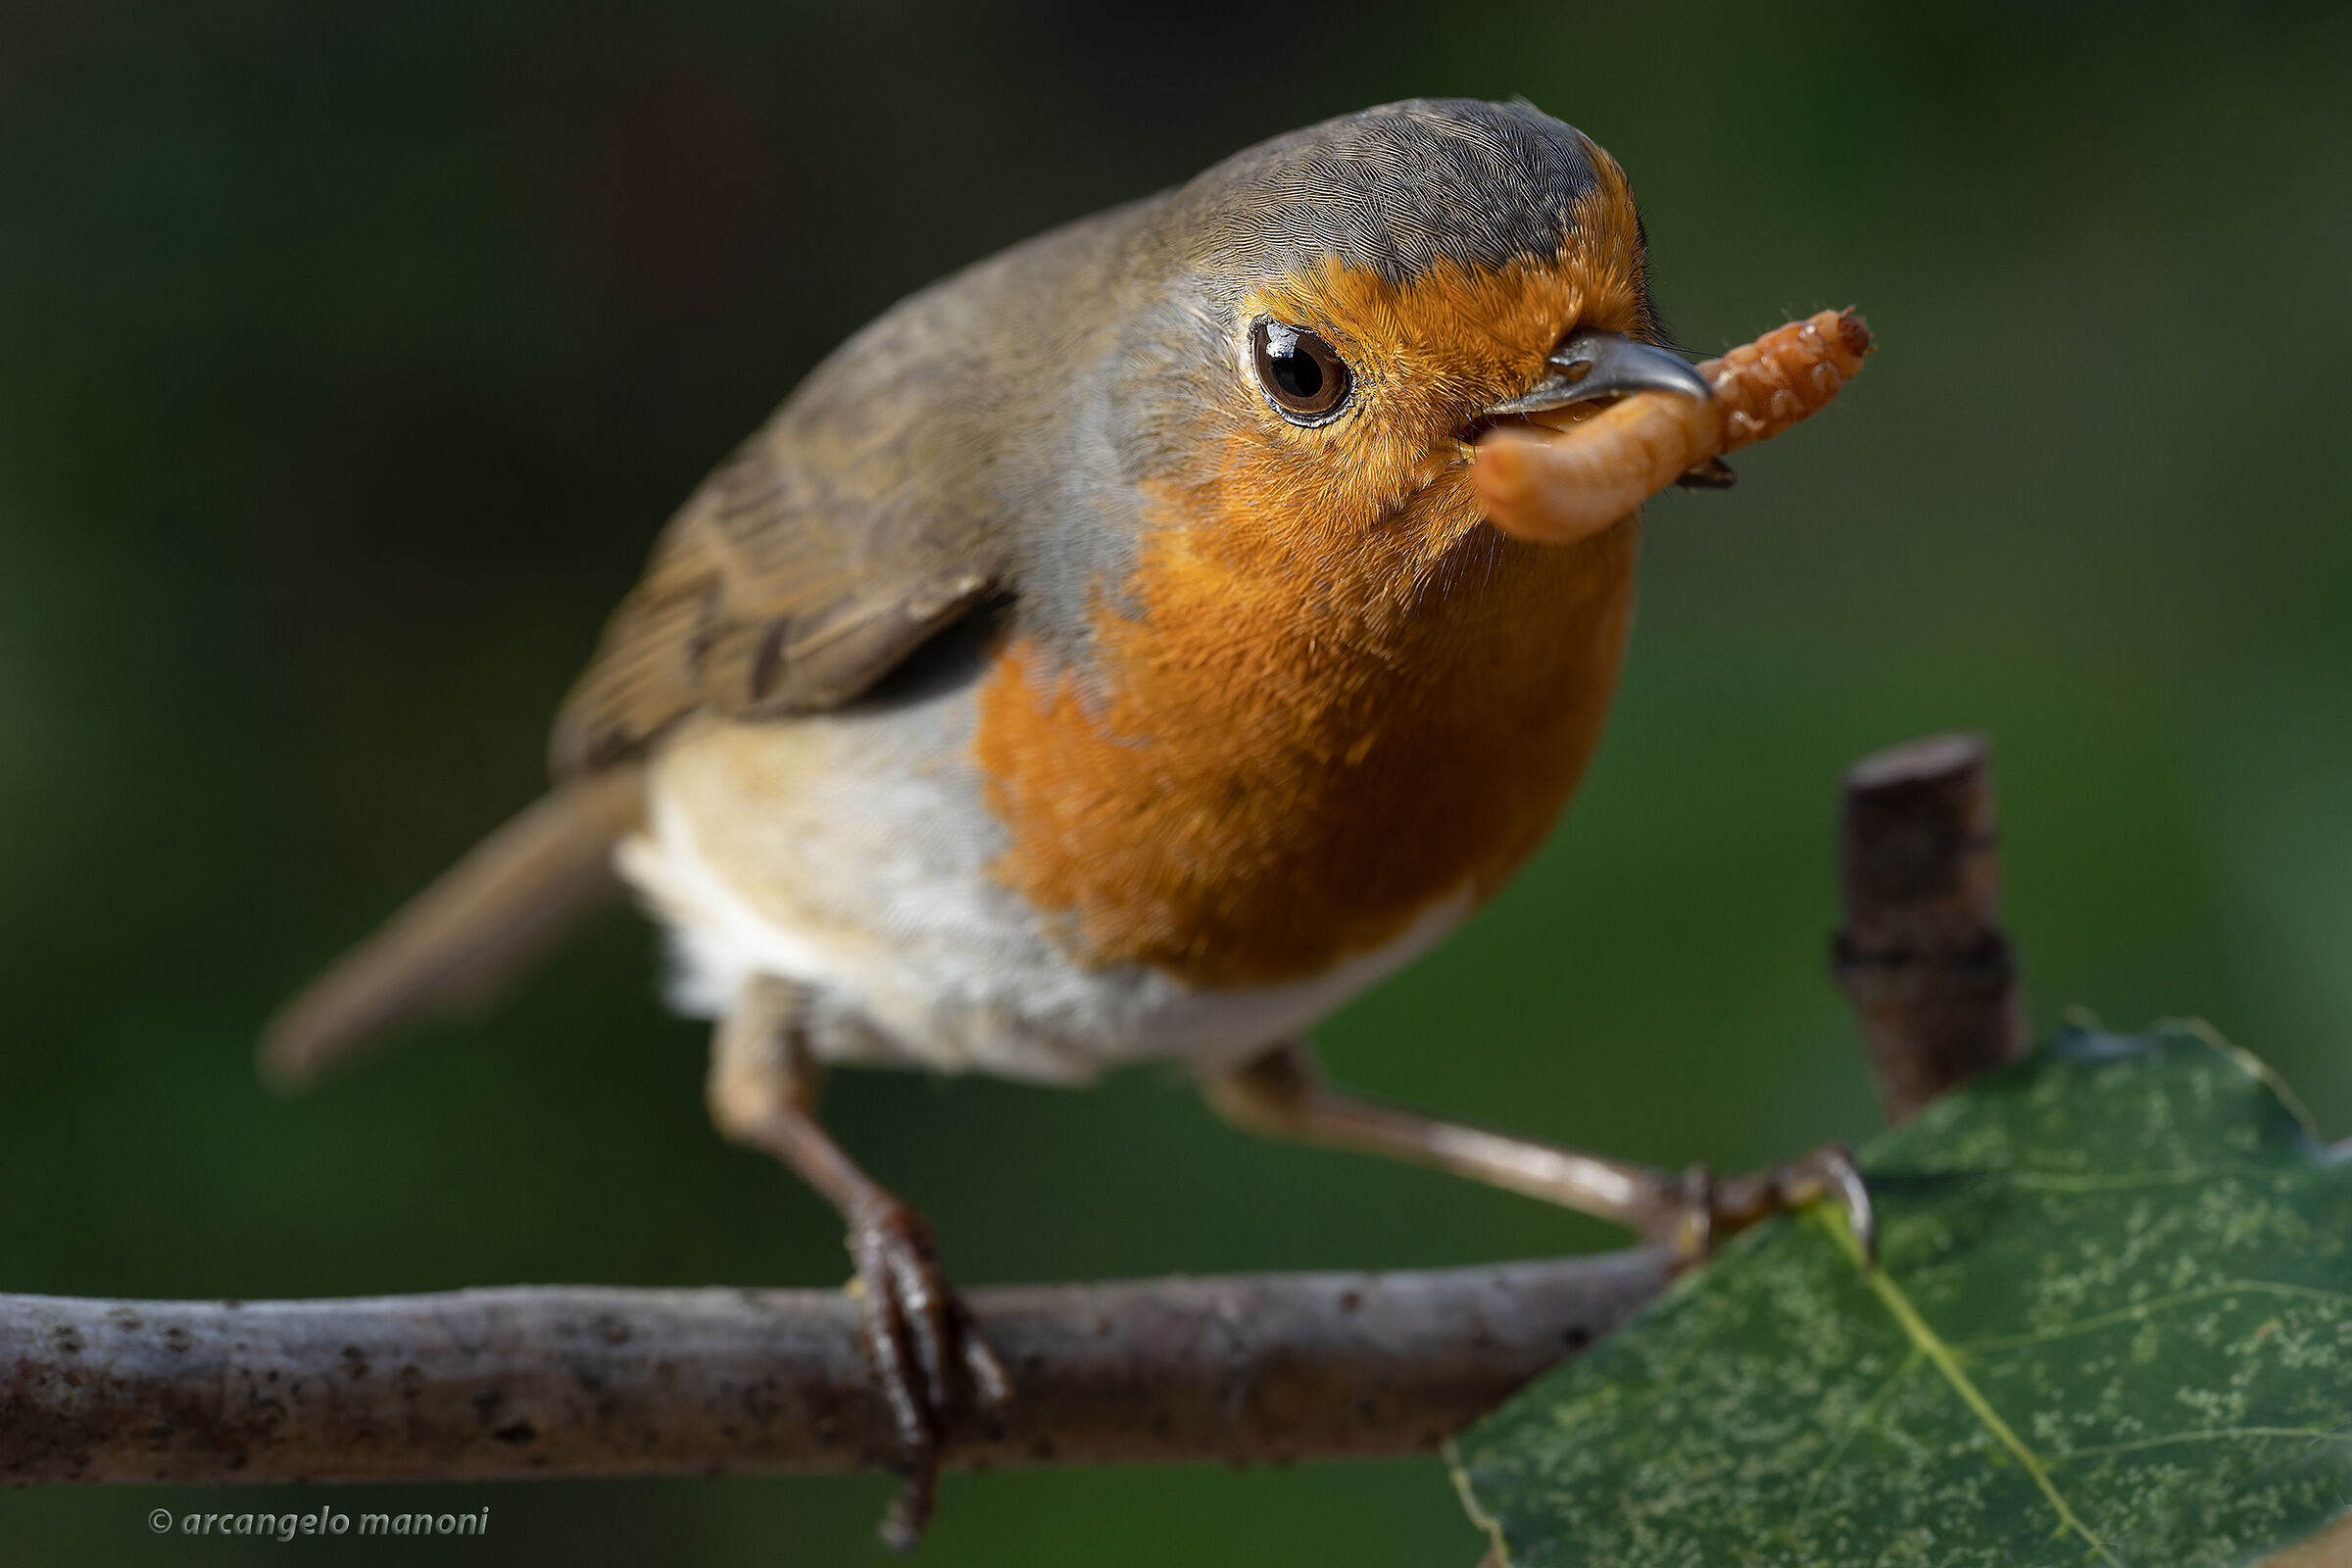 The hunt for the robin's mealworm...